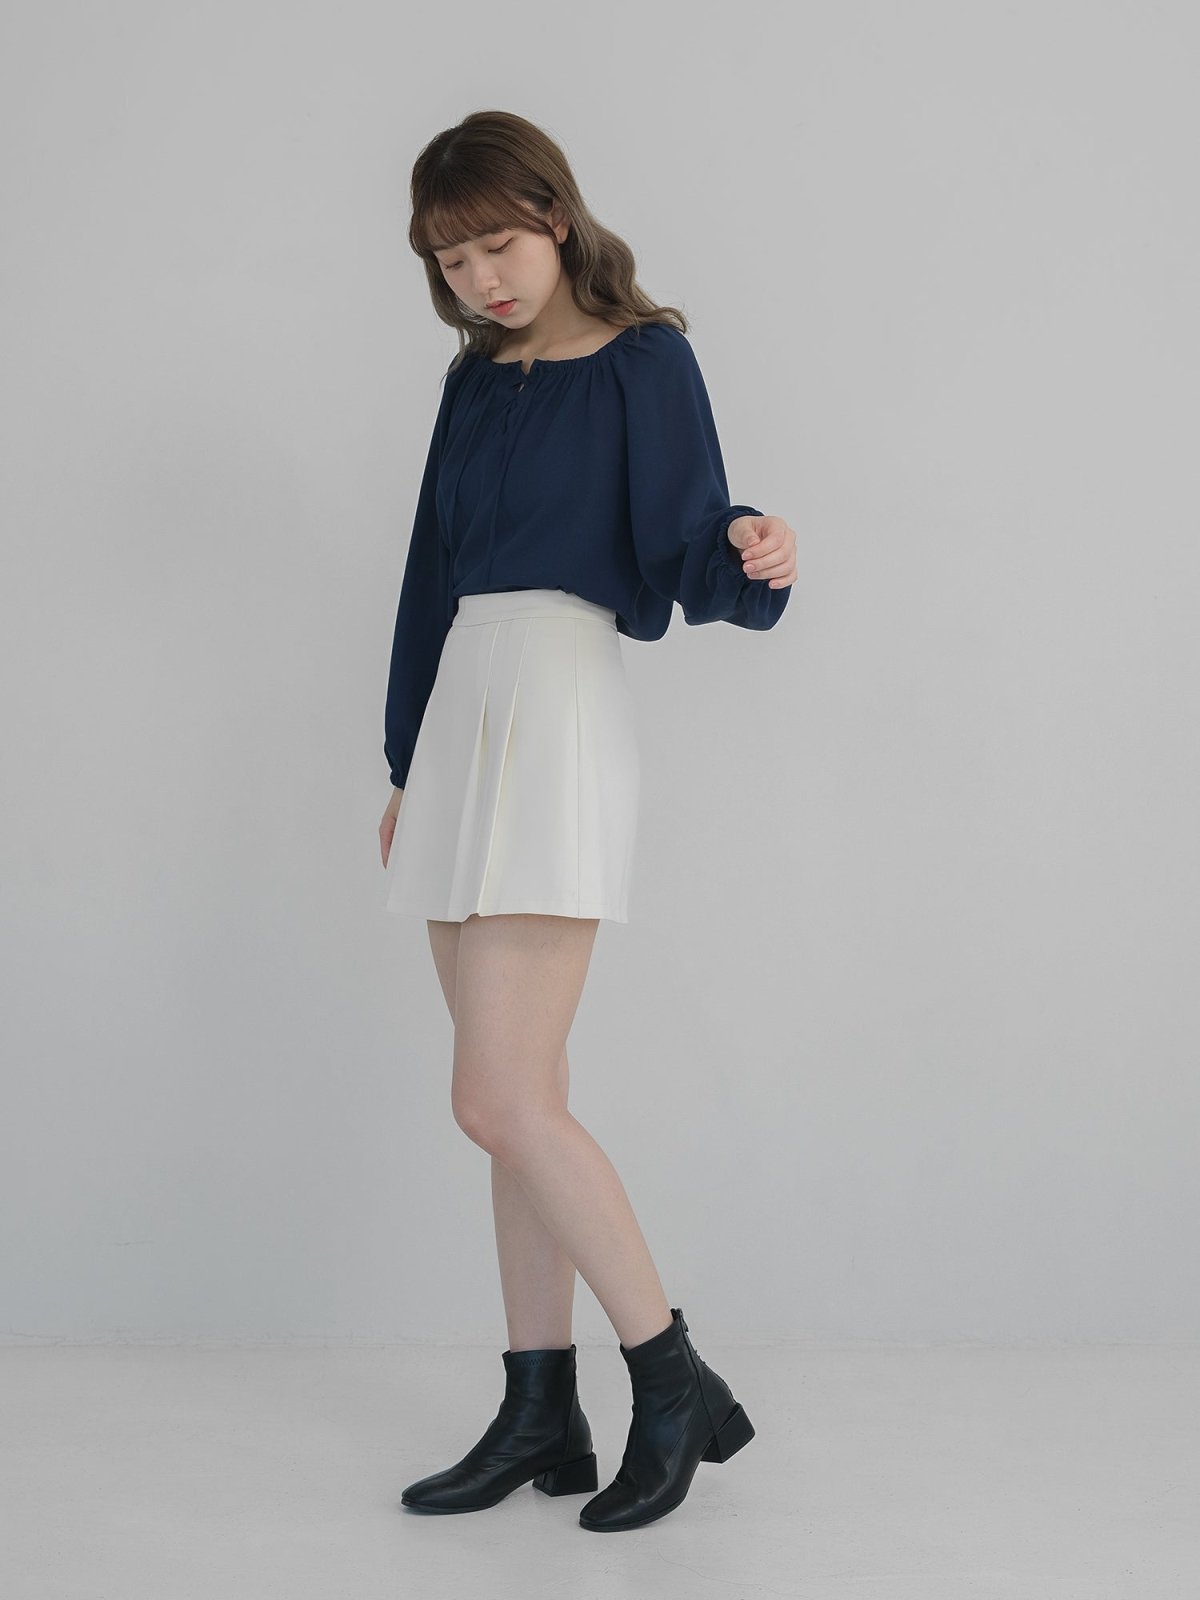 Nora Lace Up Long Sleeve Blouse - DAG-DD1270-23NavyF - Navy Blue - F - D'zage Designs